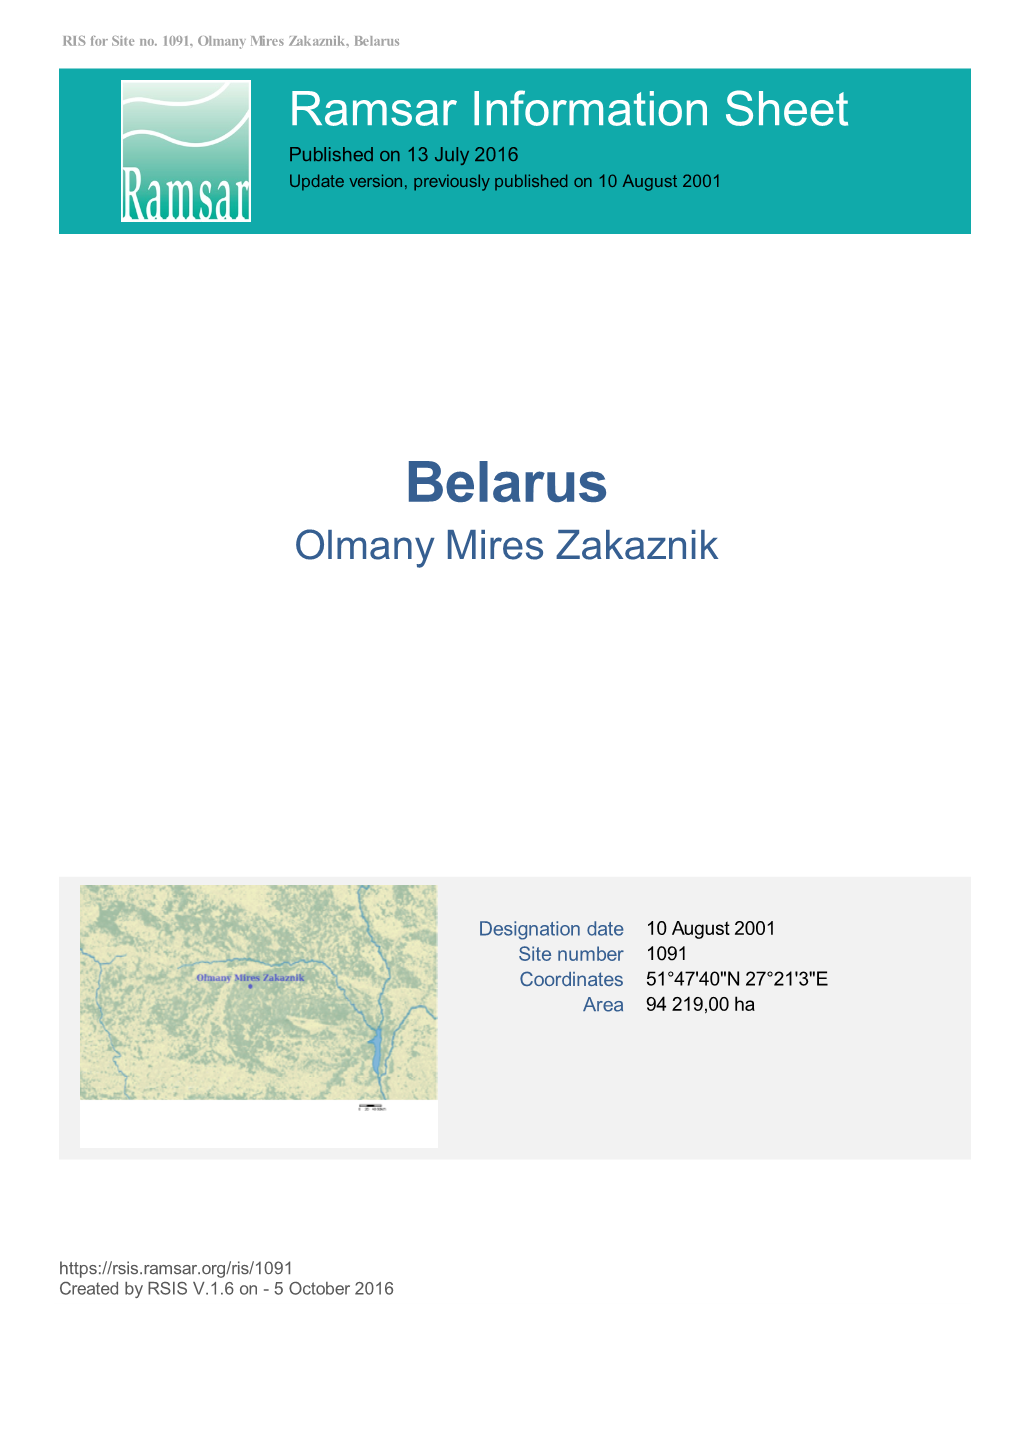 Belarus Ramsar Information Sheet Published on 13 July 2016 Update Version, Previously Published on 10 August 2001